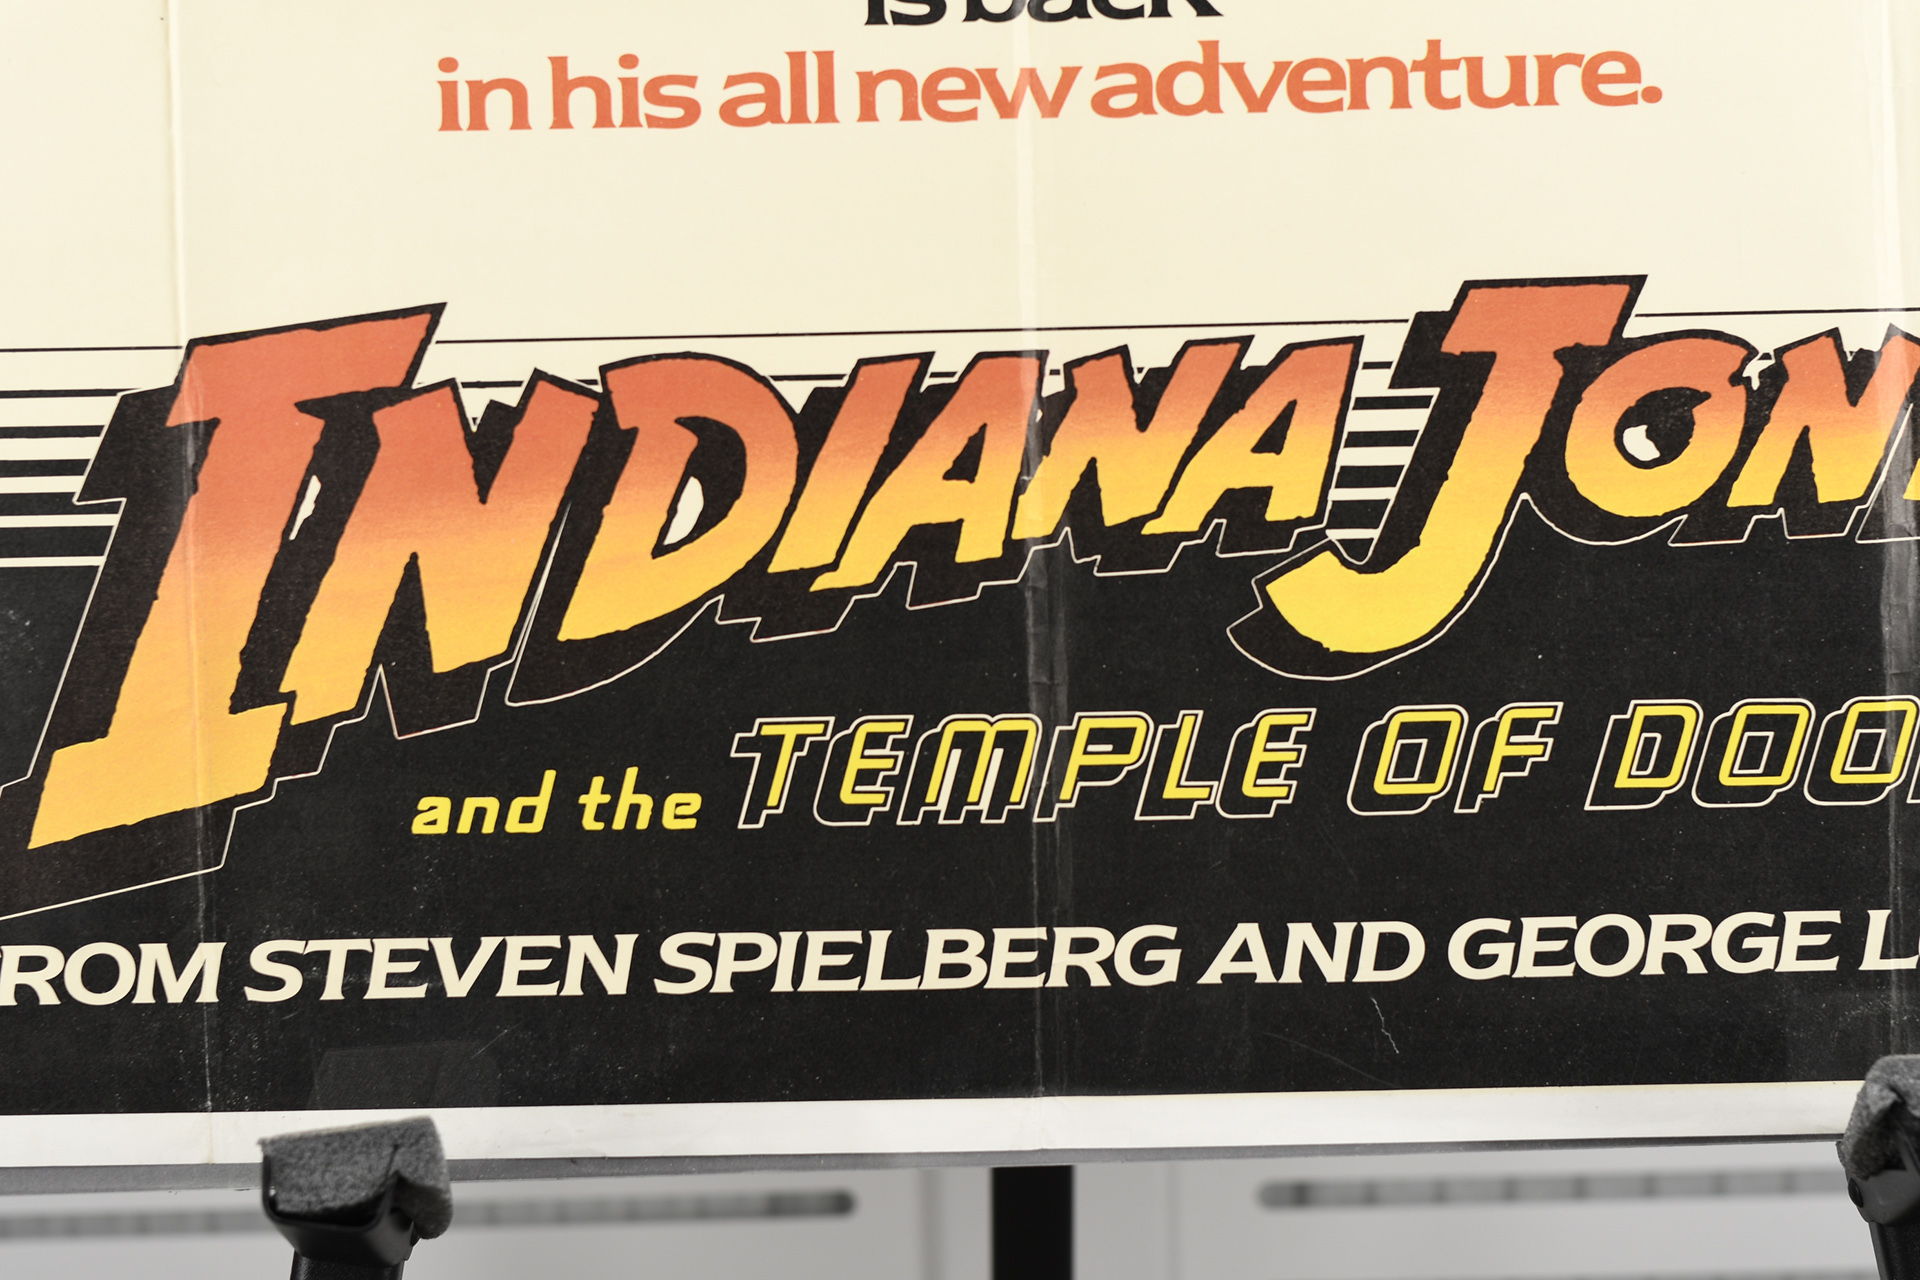 Original "Indiana Jones and the Temple of Doom" Promotional Poster